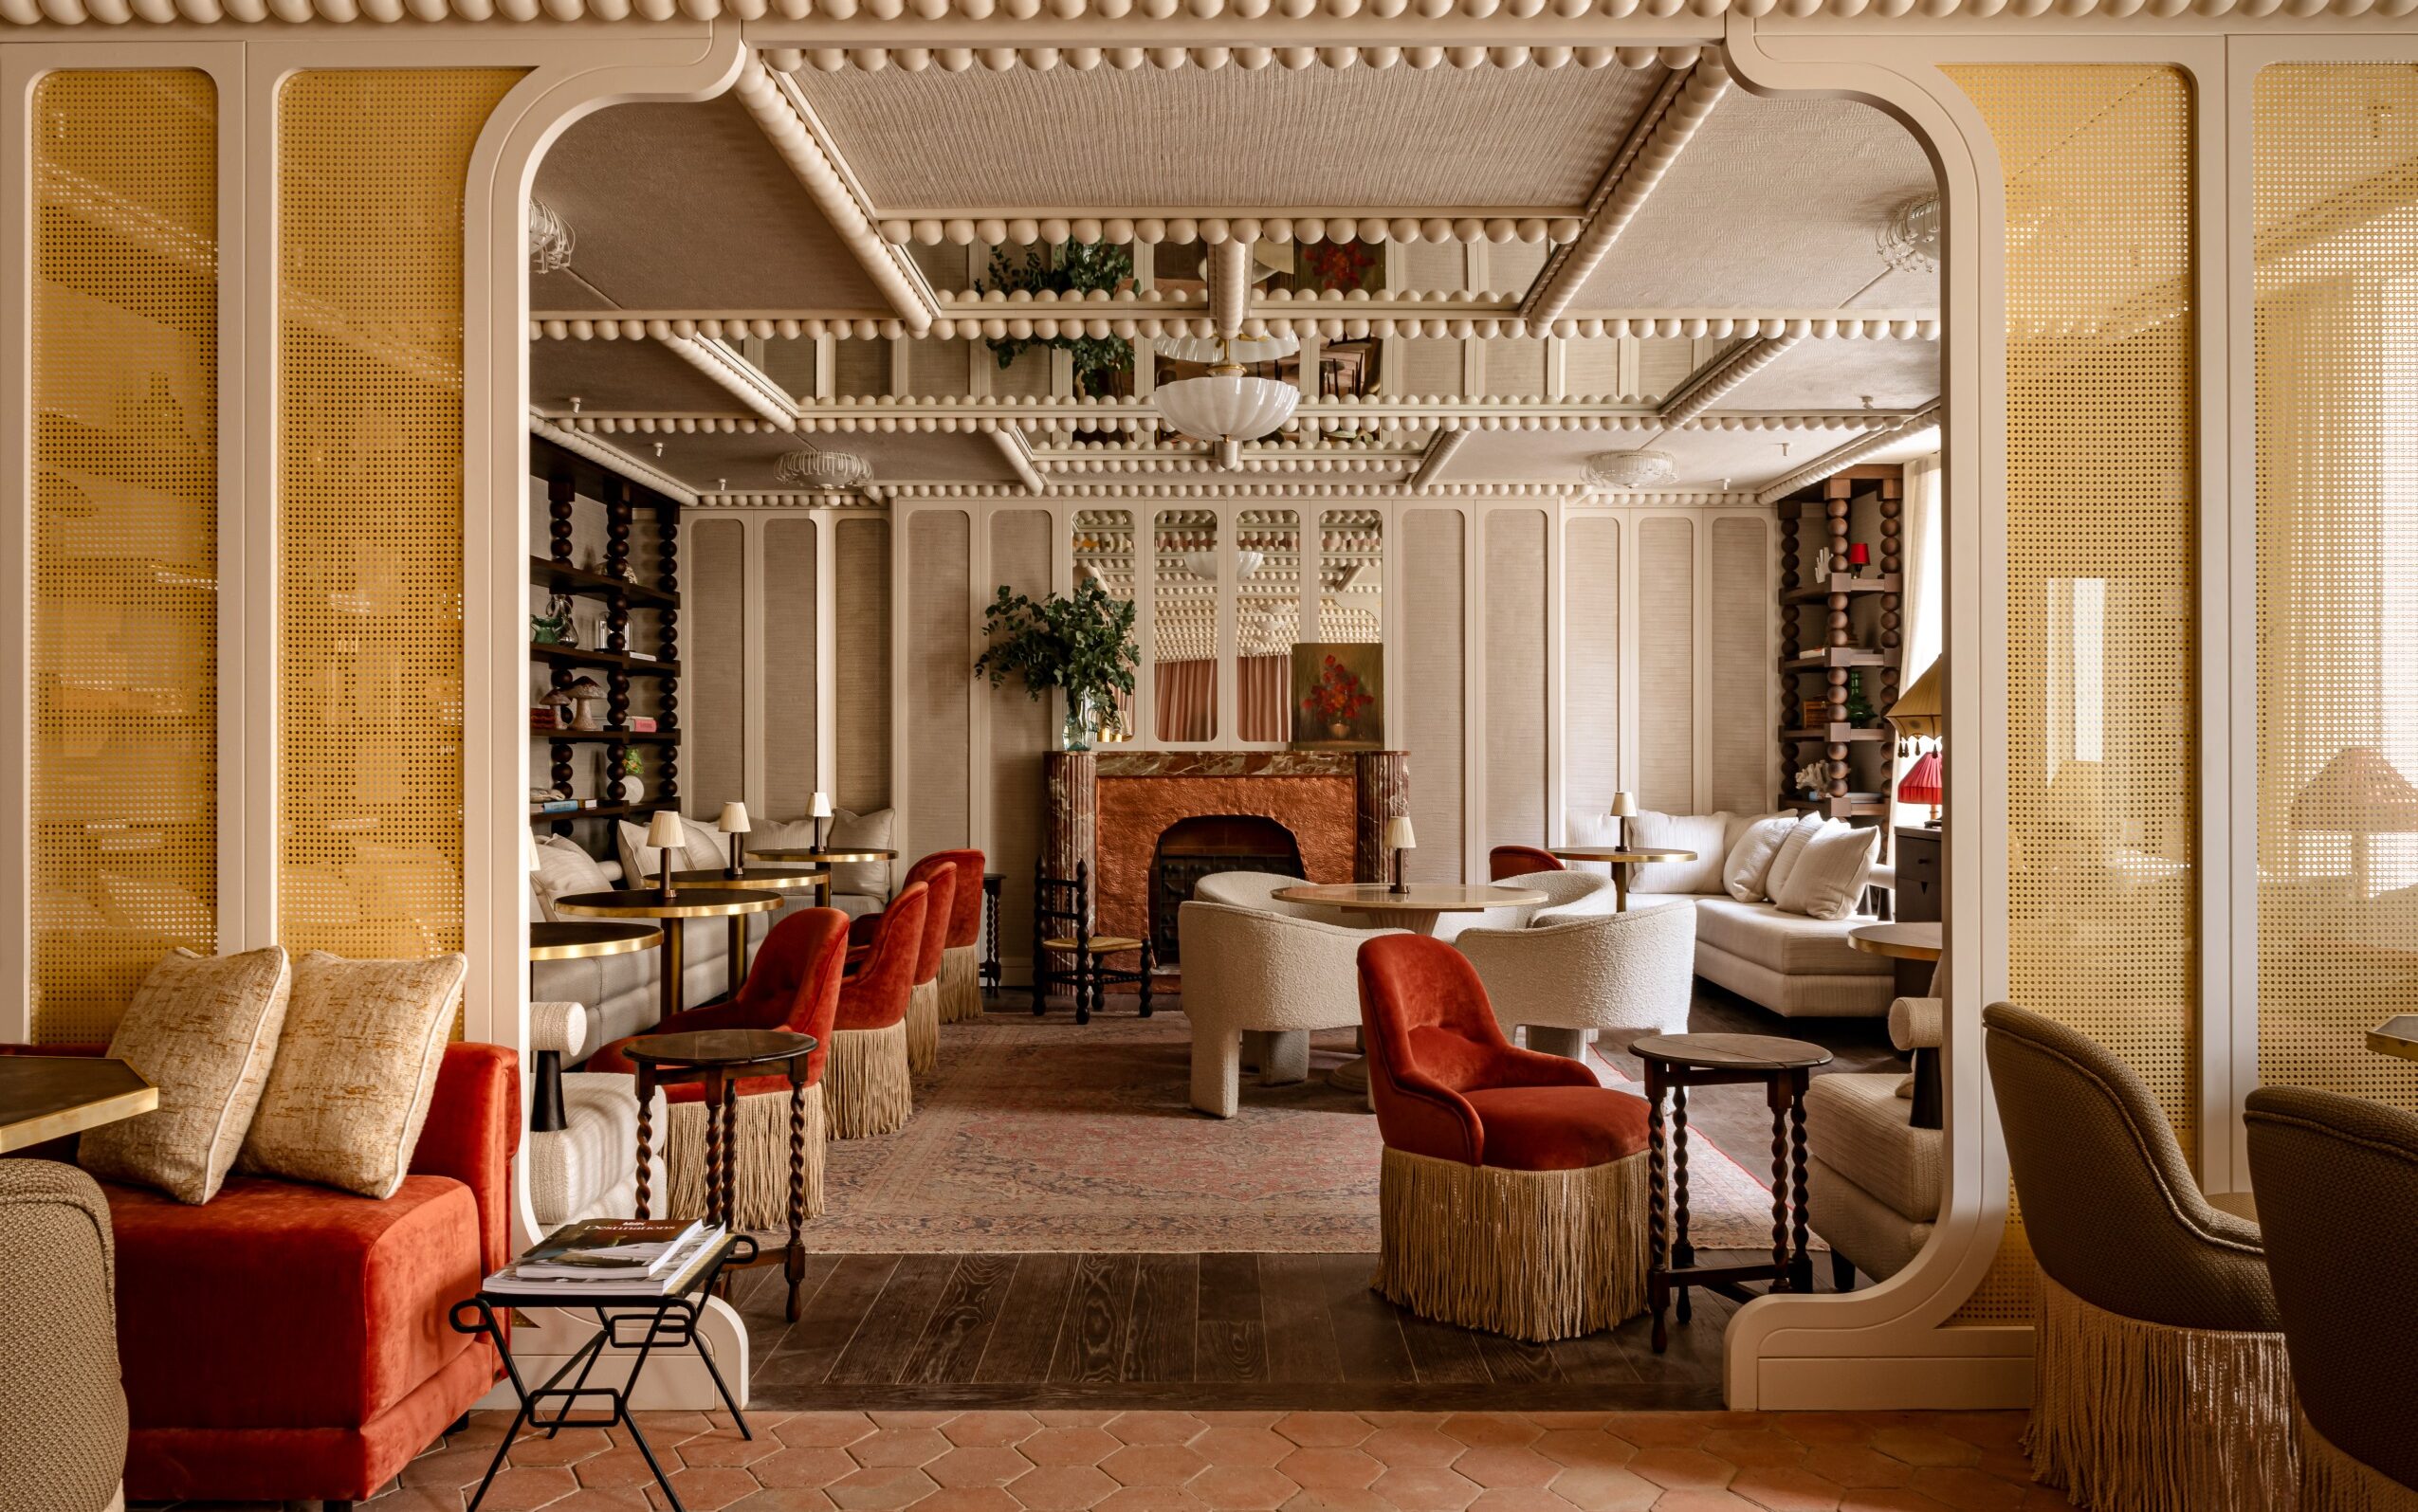 This Boutique Hotel Is the Sweet Parisian Escape of Our Romantic Travel Dreams